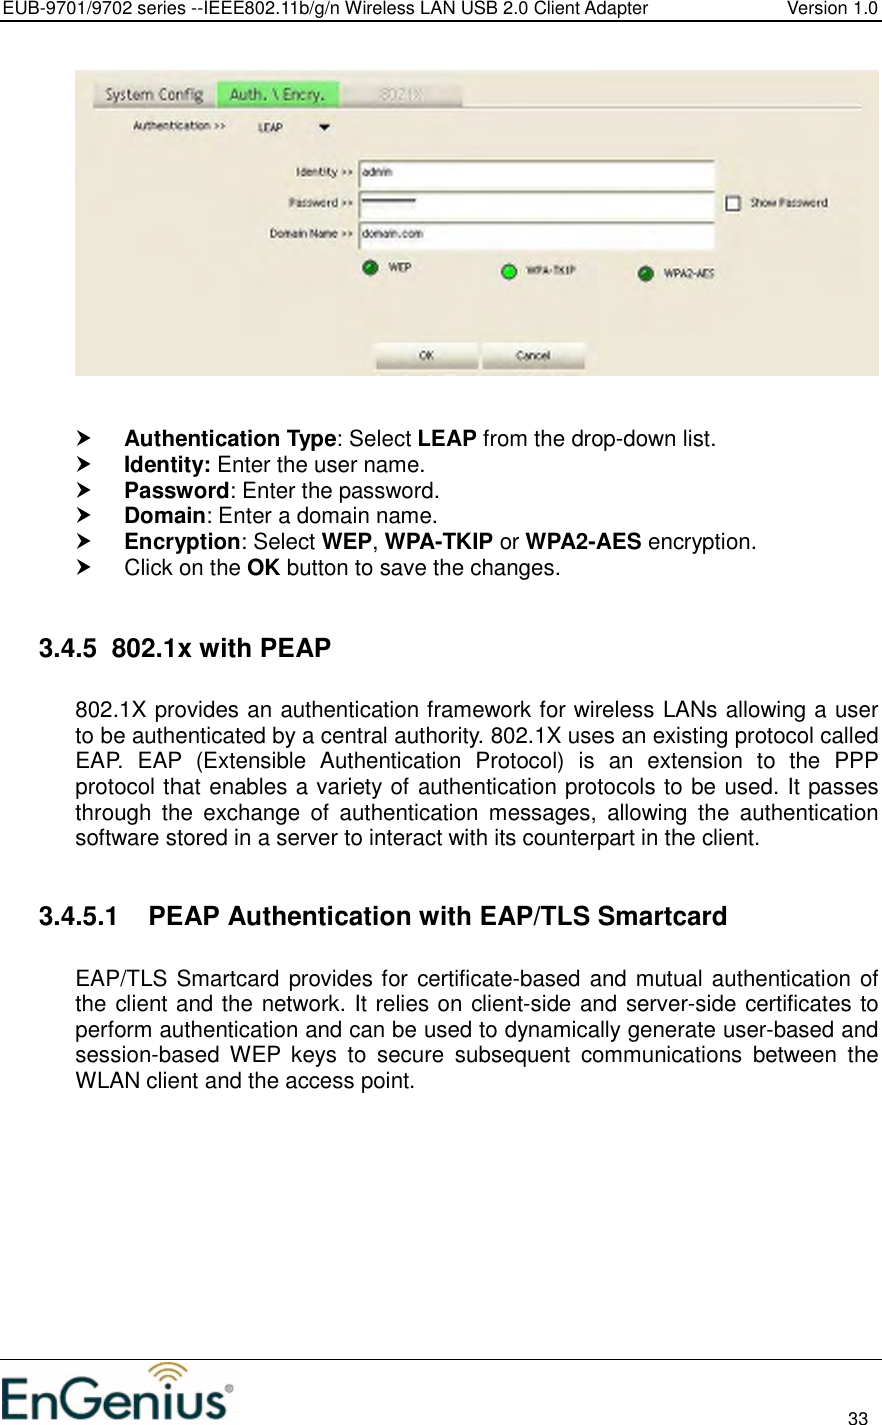 EUB-9701/9702 series --IEEE802.11b/g/n Wireless LAN USB 2.0 Client Adapter  Version 1.0                                                                                                                          33      Authentication Type: Select LEAP from the drop-down list.   Identity: Enter the user name.  Password: Enter the password.  Domain: Enter a domain name.  Encryption: Select WEP, WPA-TKIP or WPA2-AES encryption.   Click on the OK button to save the changes.   3.4.5  802.1x with PEAP  802.1X provides an authentication framework for wireless LANs allowing a user to be authenticated by a central authority. 802.1X uses an existing protocol called EAP.  EAP  (Extensible  Authentication  Protocol)  is  an  extension  to  the  PPP protocol that enables a variety of authentication protocols to be used. It passes through  the  exchange  of  authentication  messages,  allowing  the  authentication software stored in a server to interact with its counterpart in the client.  3.4.5.1  PEAP Authentication with EAP/TLS Smartcard  EAP/TLS Smartcard provides for certificate-based and mutual authentication of the client and the network. It relies on client-side and server-side certificates to perform authentication and can be used to dynamically generate user-based and session-based  WEP  keys  to  secure  subsequent  communications  between  the WLAN client and the access point.  